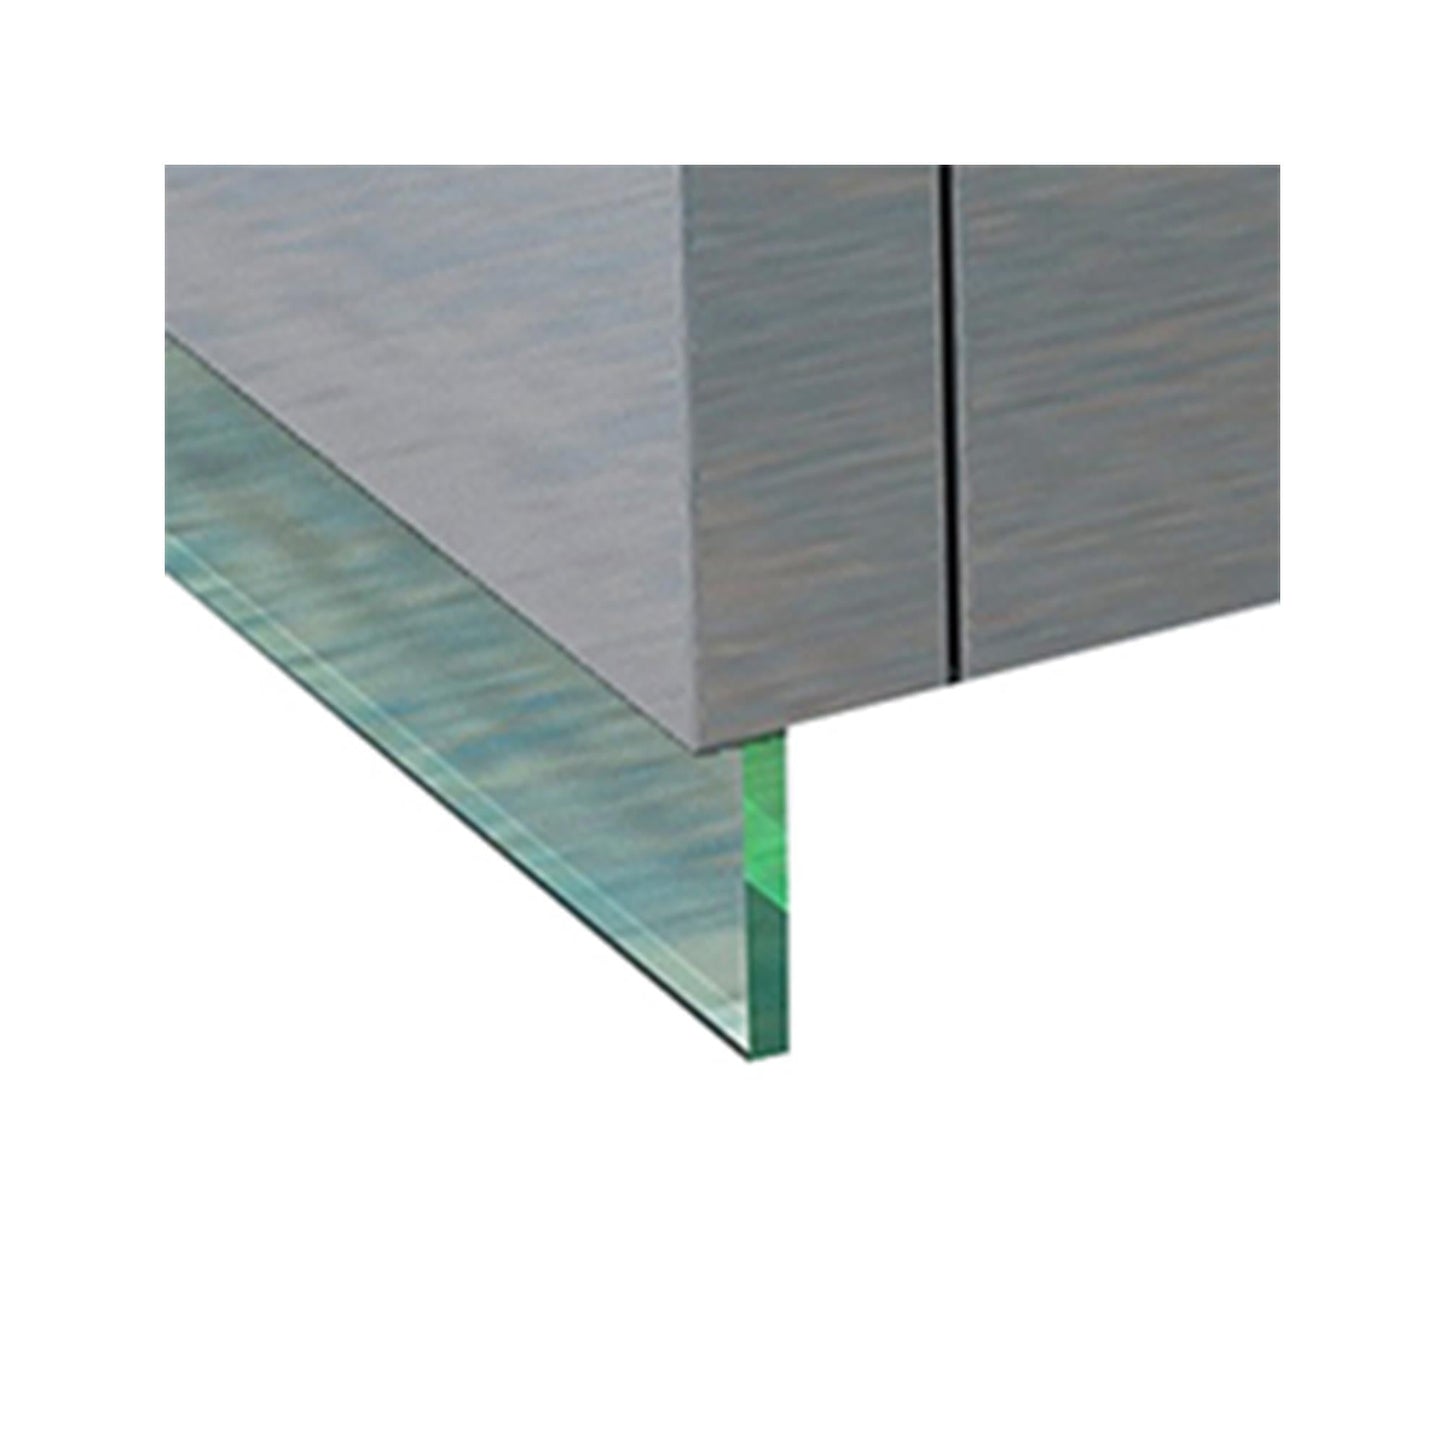 Ria Modern & Contemporary Style Built in LED Style Coffee Table in Gray color Made with Wood & Glossy Finish